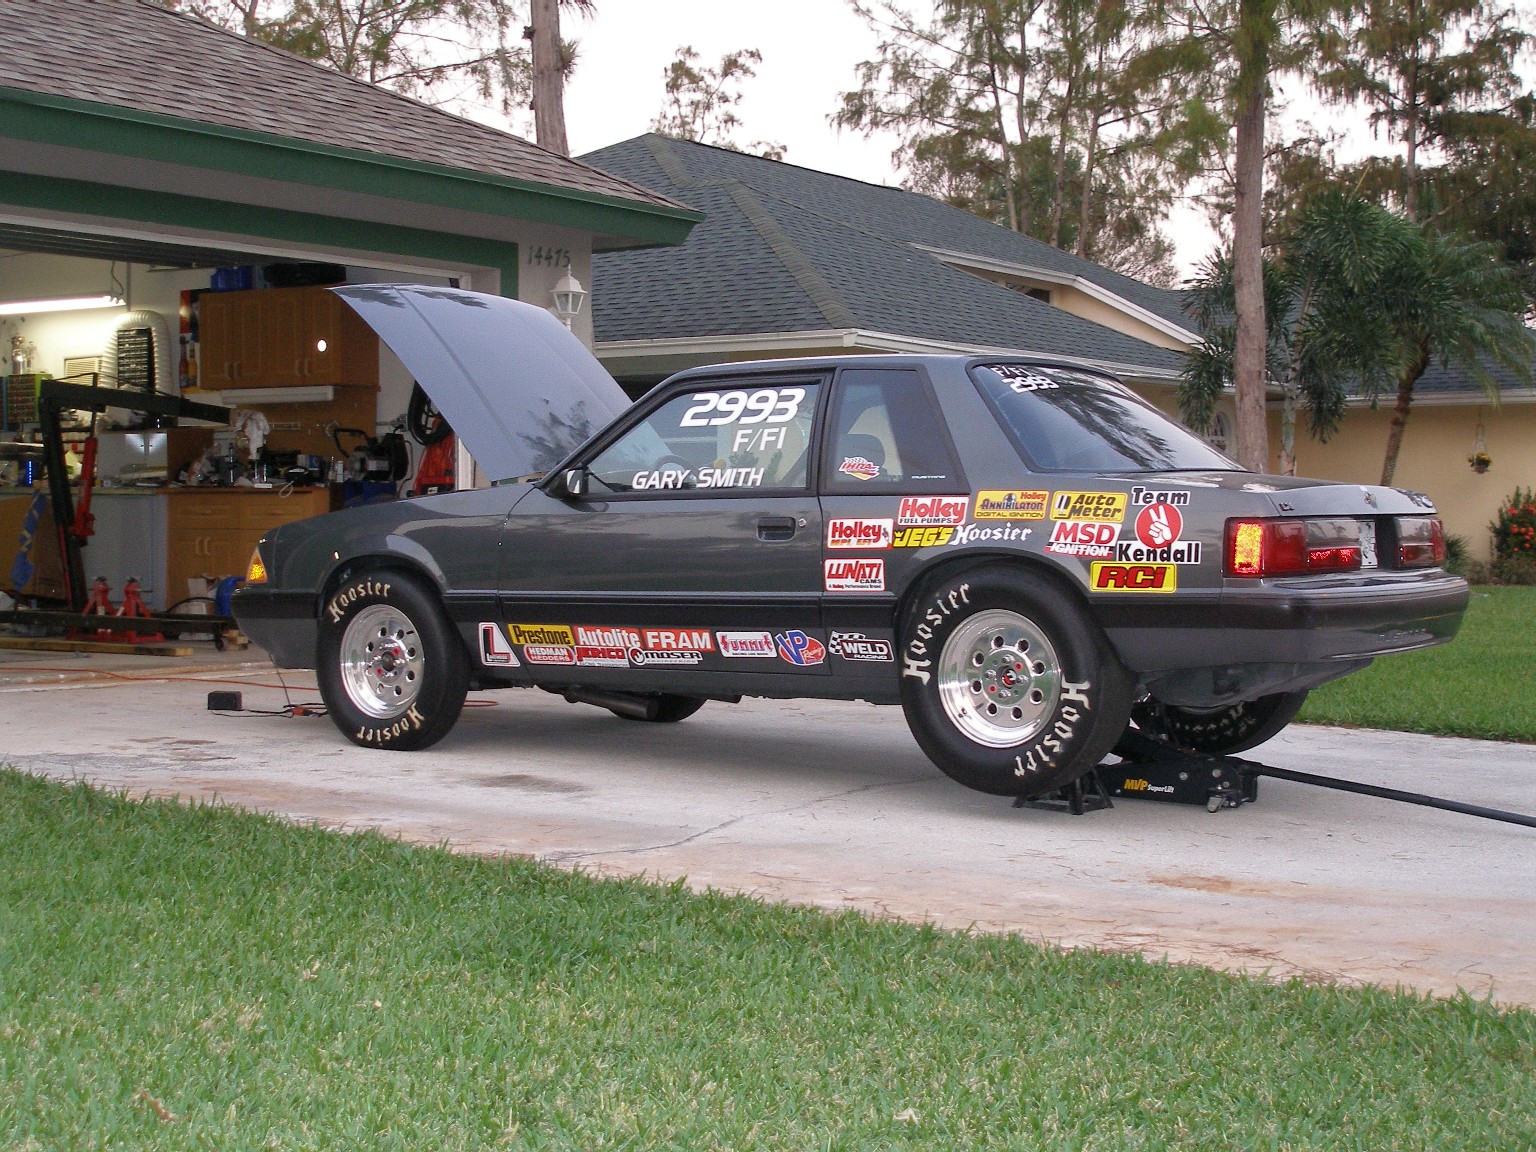  1989 Ford Mustang LX